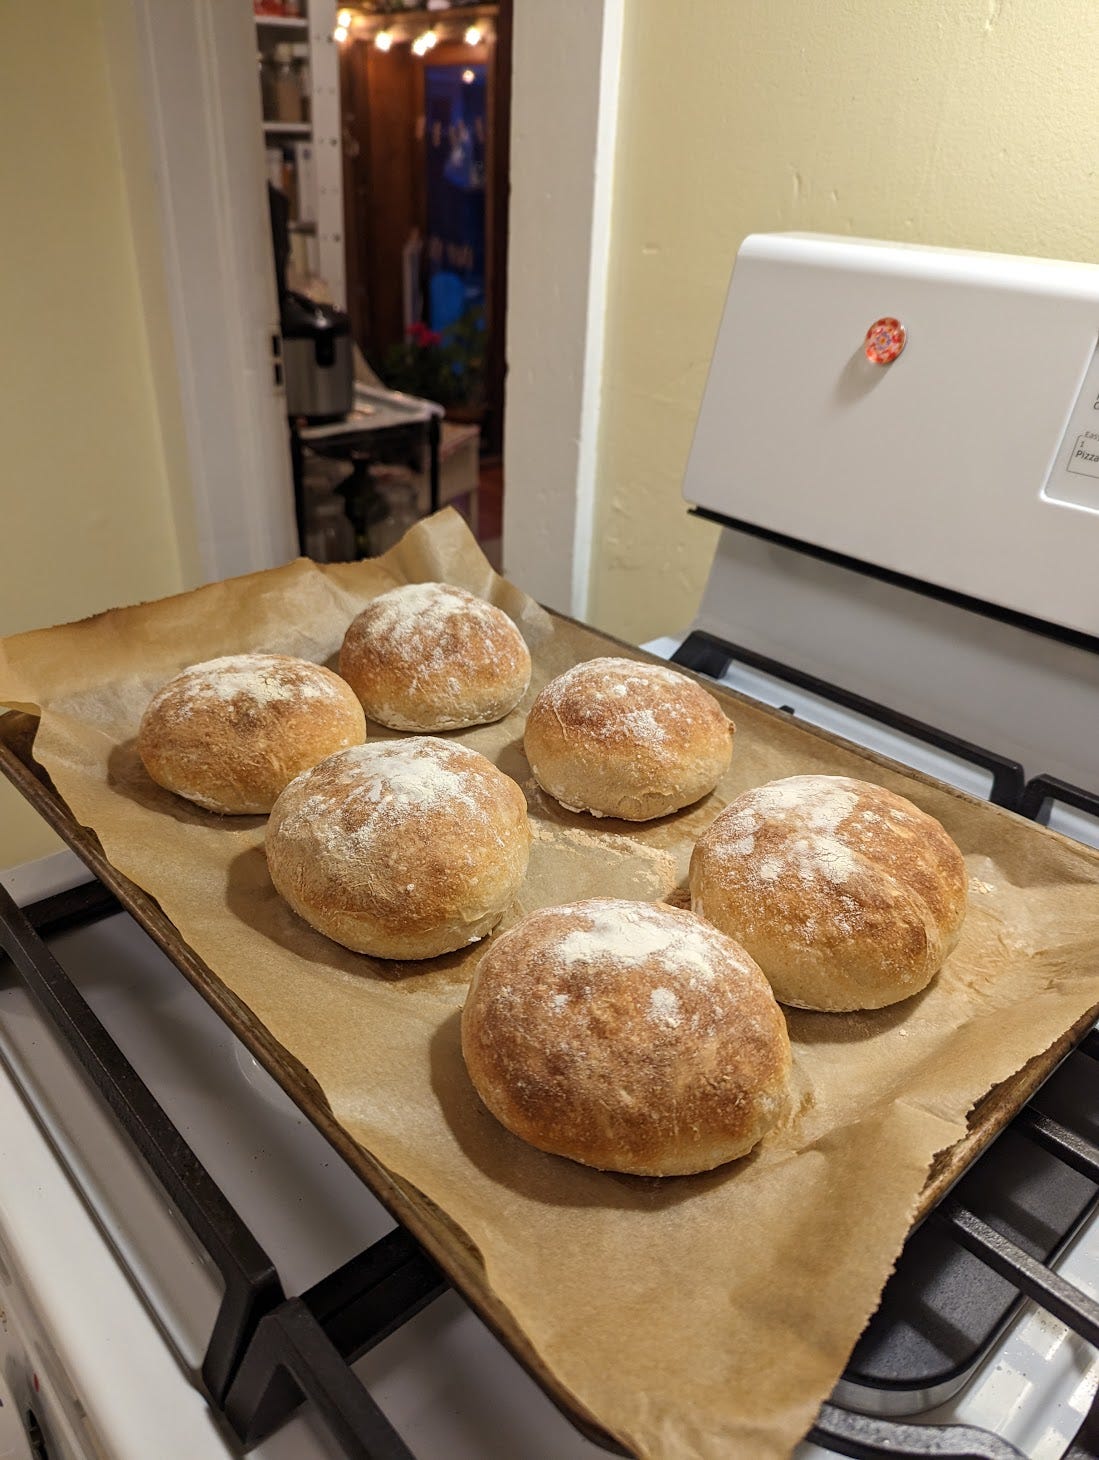 Six sourdough buns just out of the oven.